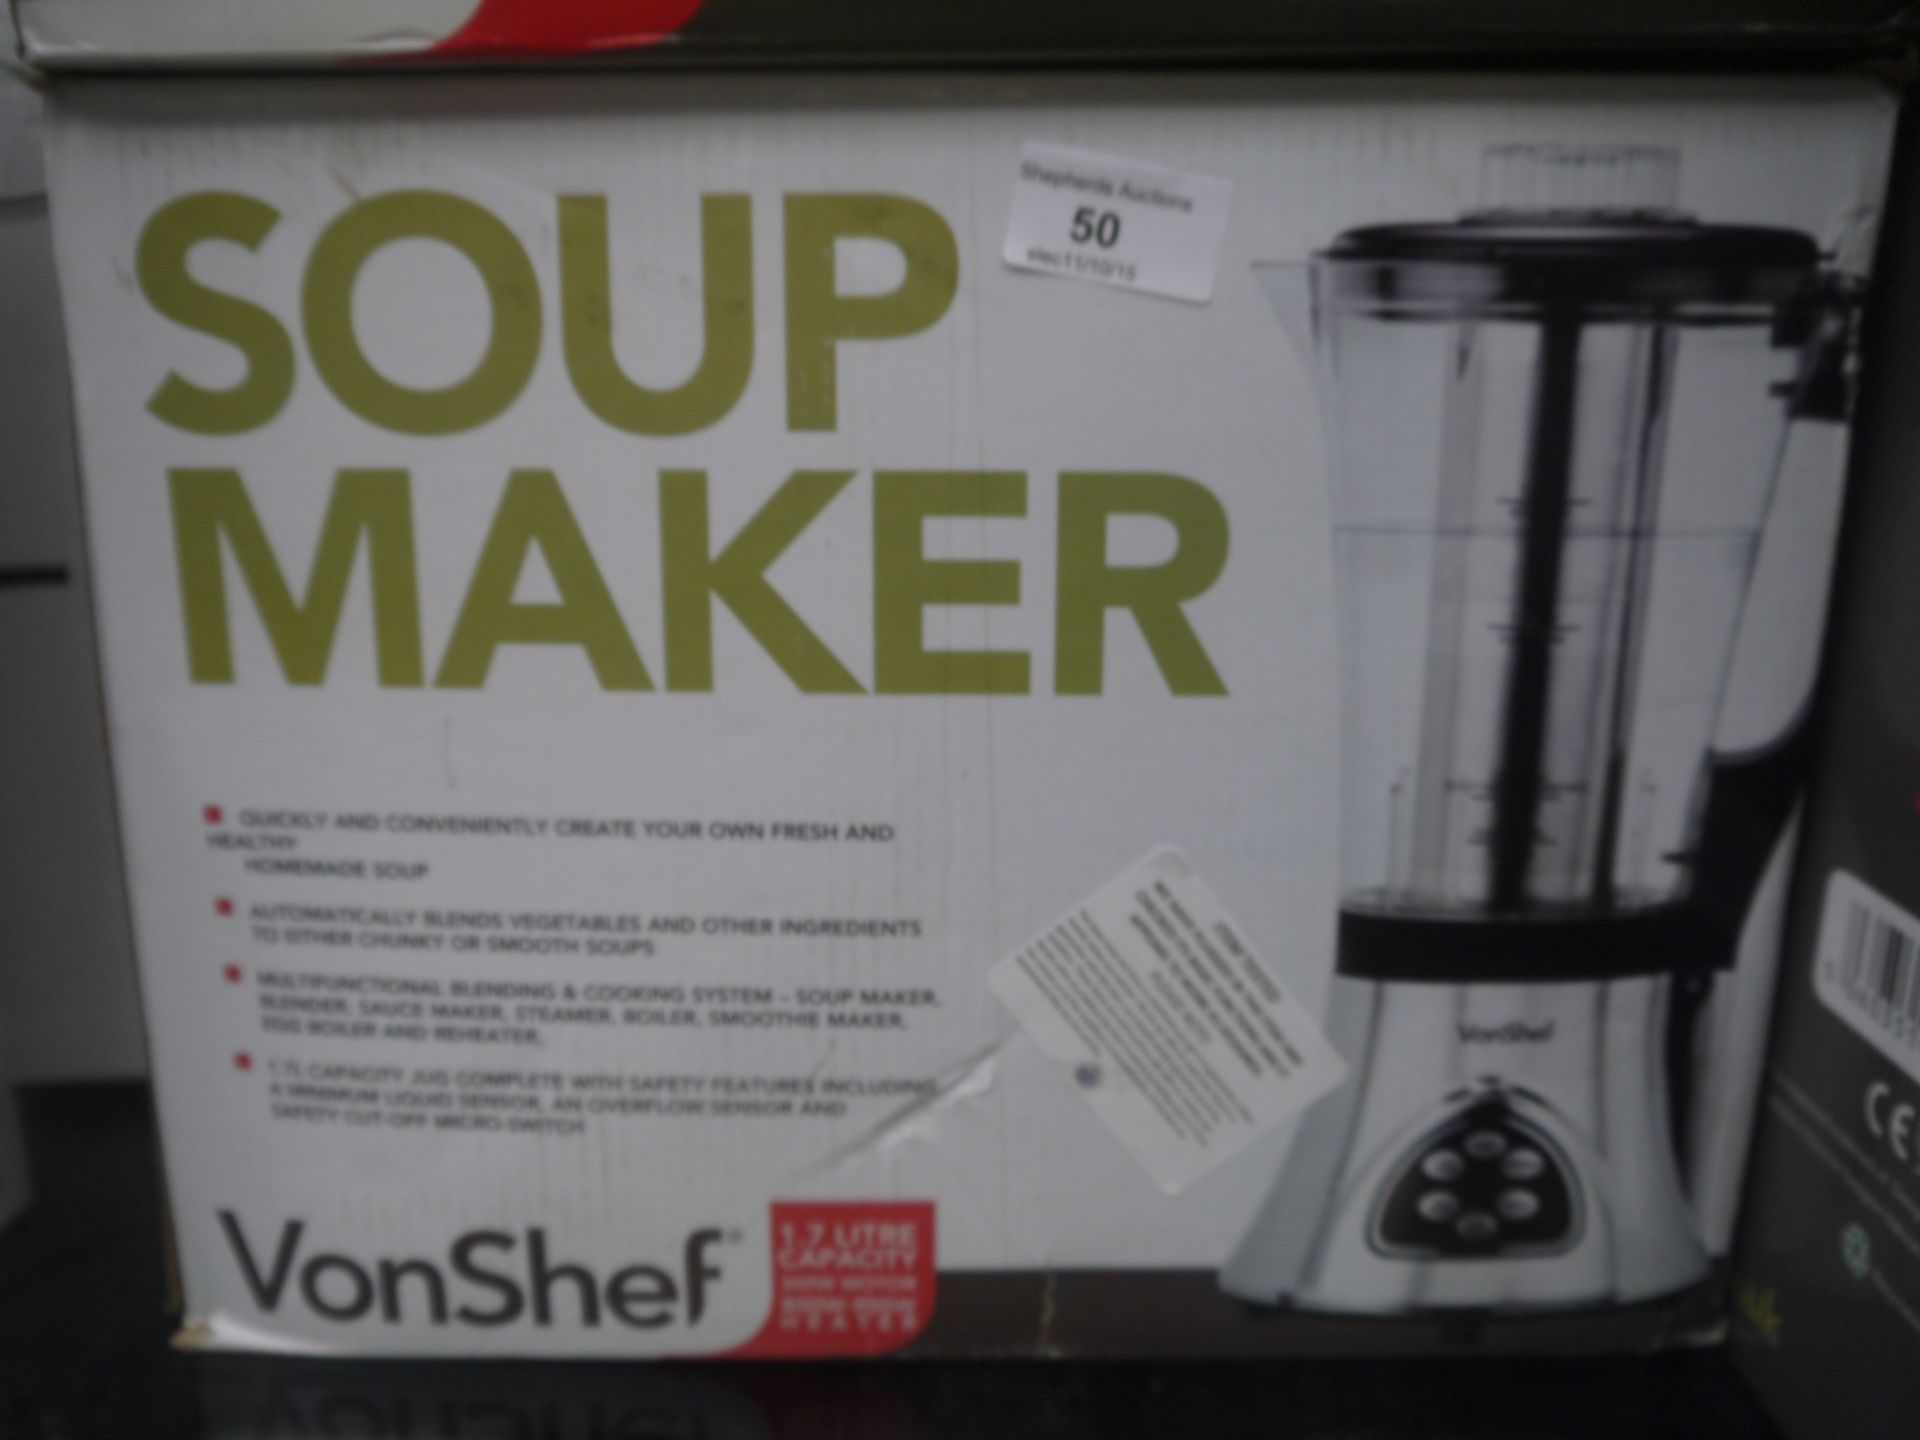 VonShef Soup Maker 1.7 Litre 300w Motor, 800-900w Heater tested working boxed